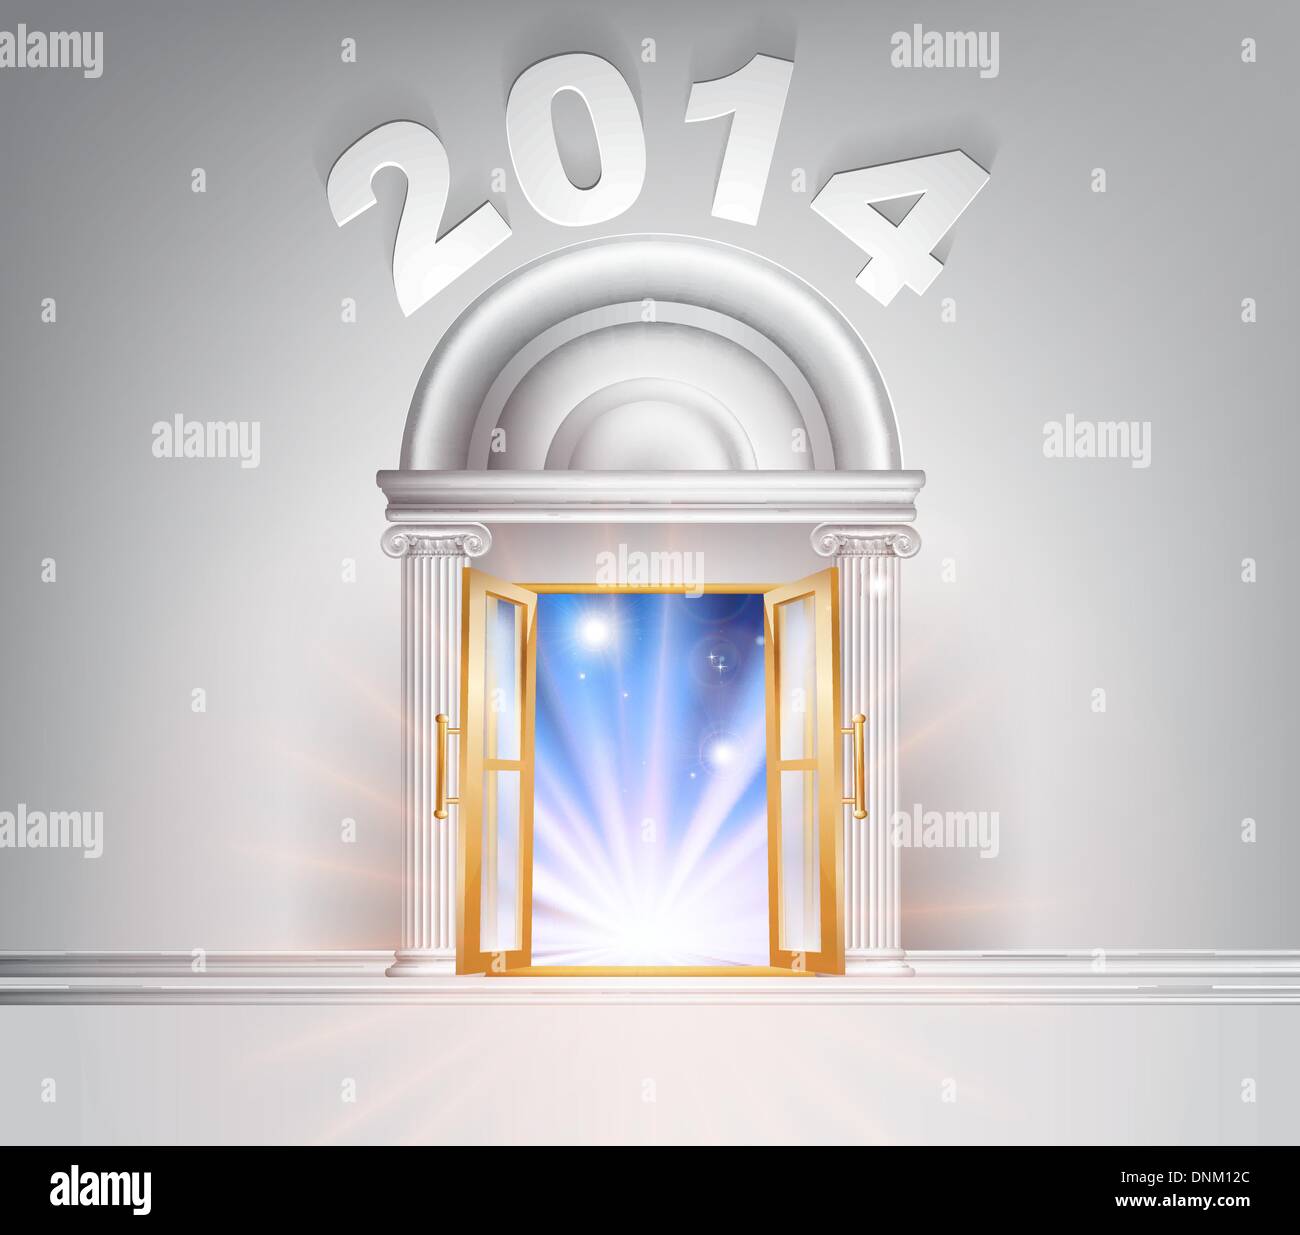 New Year Door 2014 concept of a fantastic white marble door with columns with light streaming through it. Stock Vector